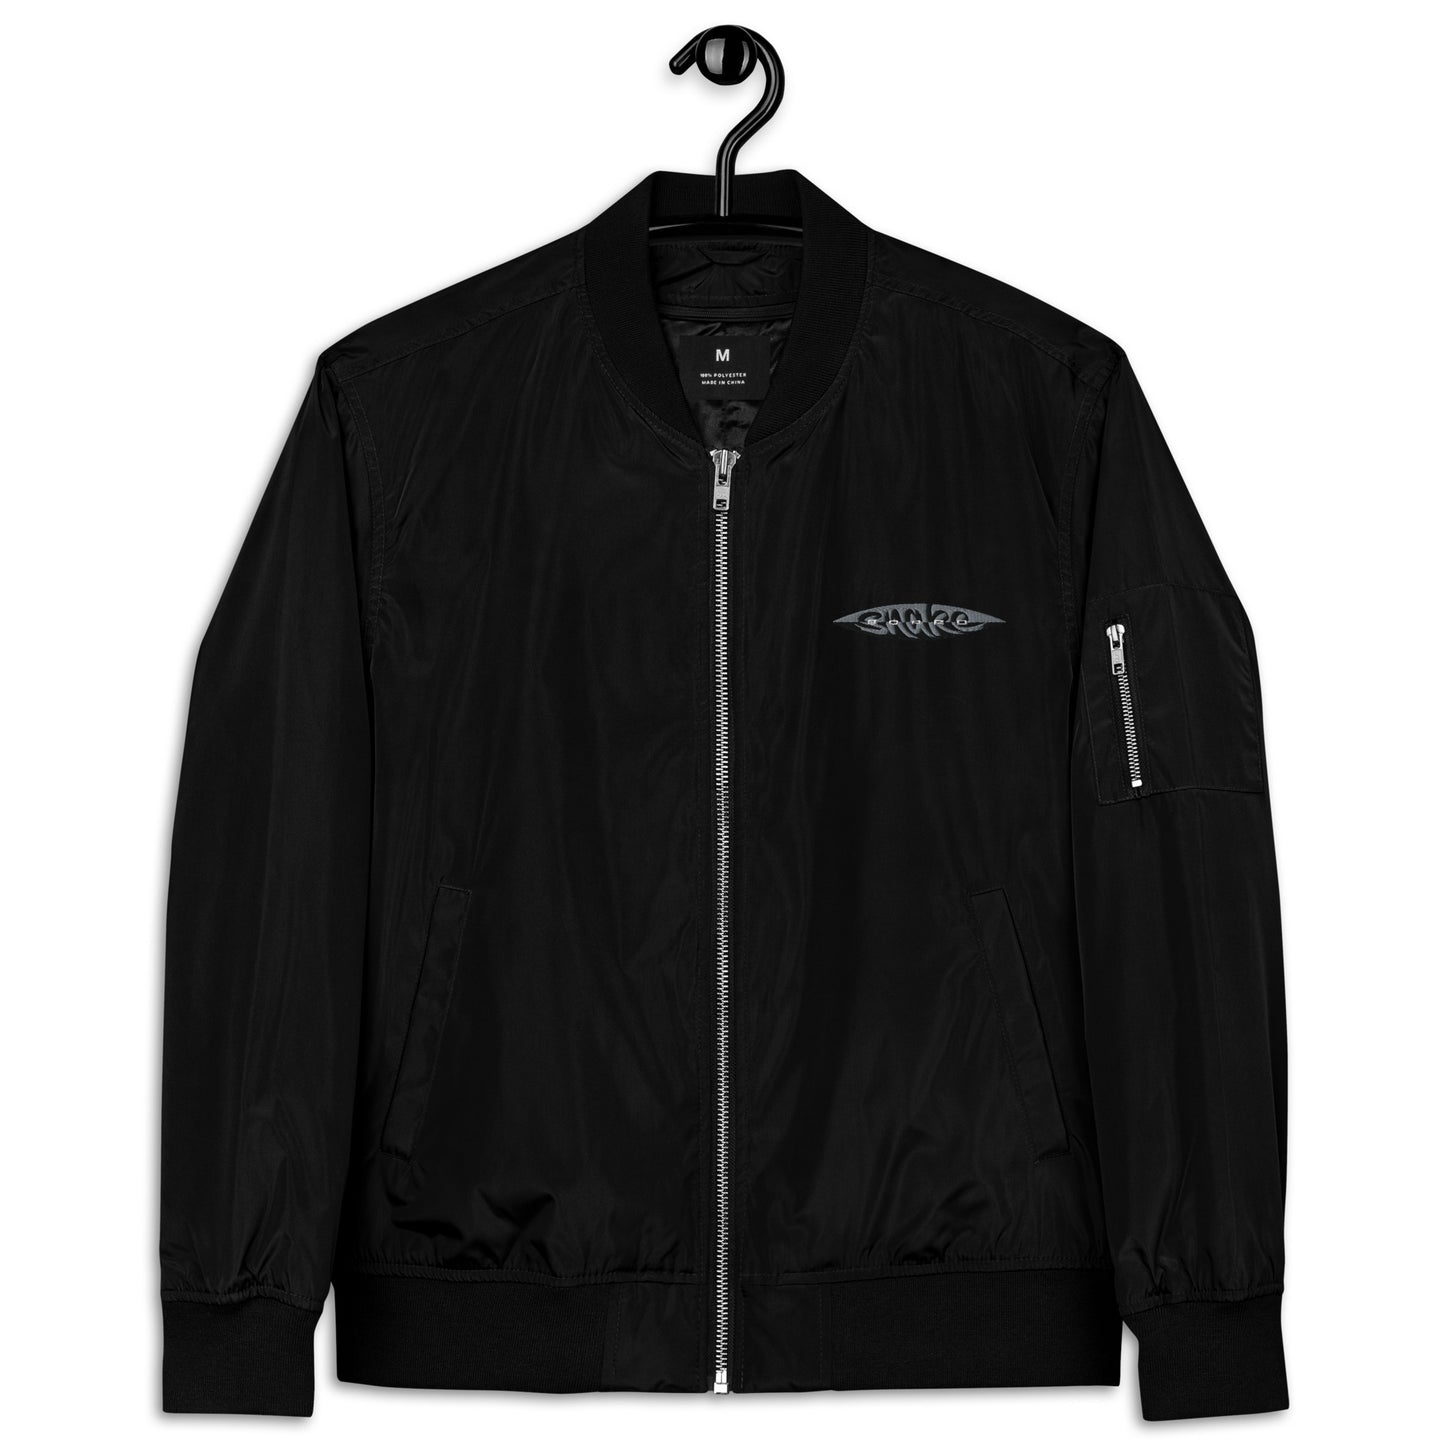 Snakeboard Premium Recycled Bomber Jacket